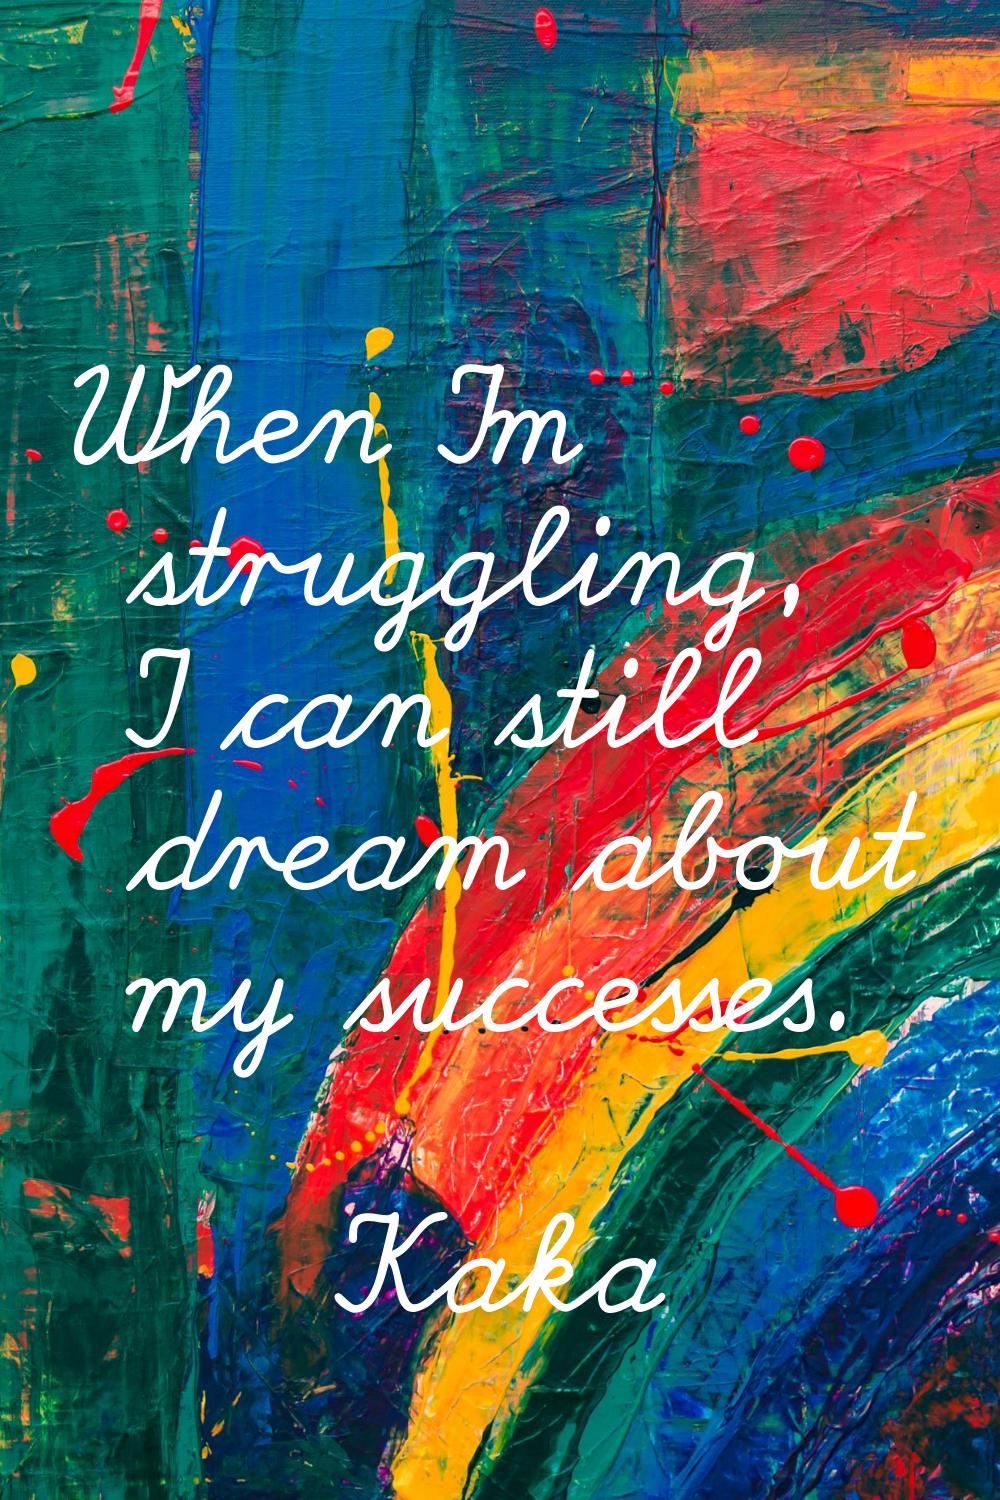 When I'm struggling, I can still dream about my successes.